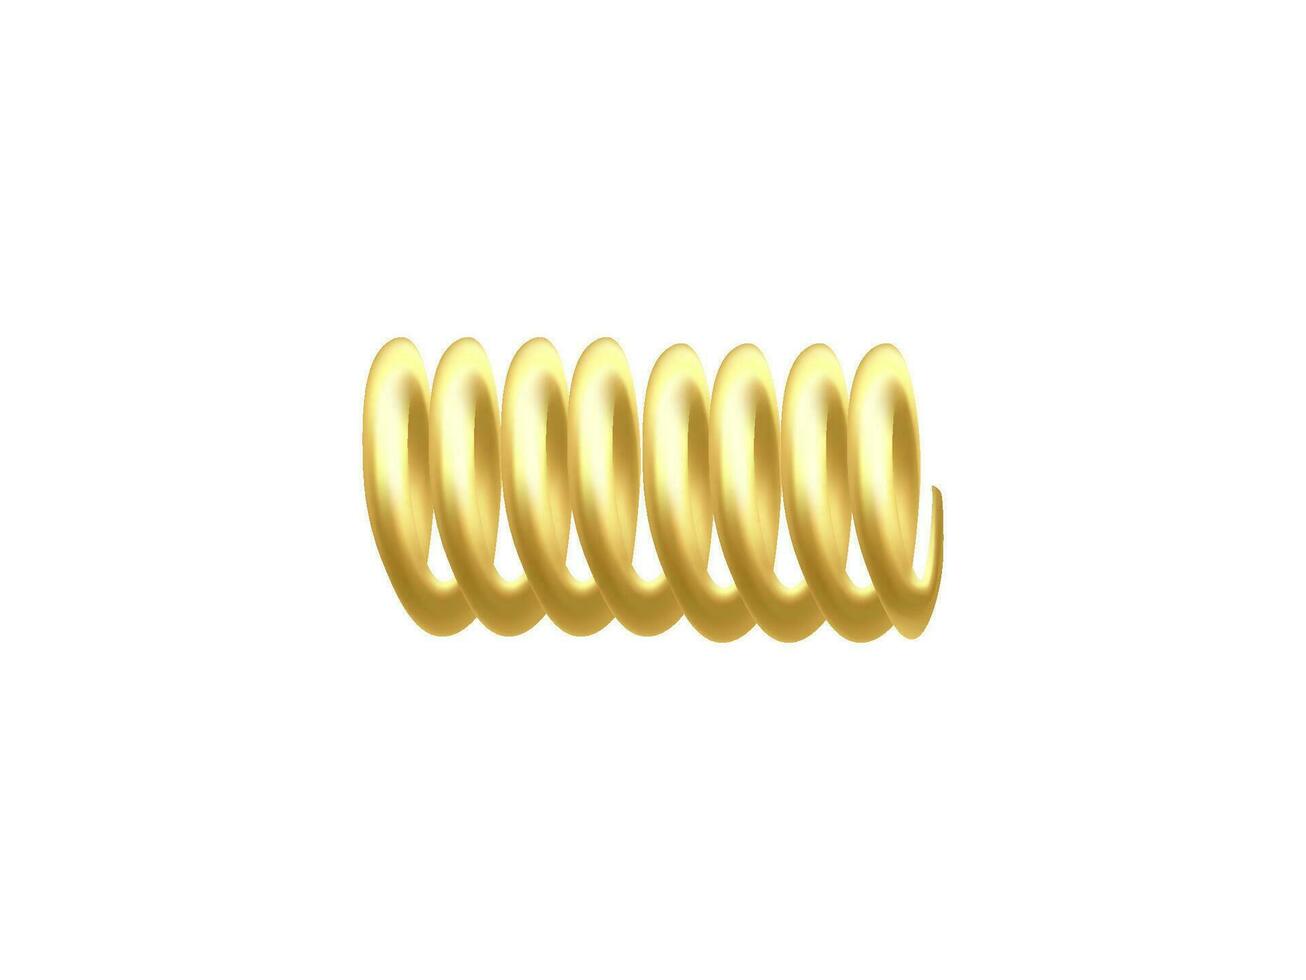 Template of twisted spiral golden spring, realistic vector illustration isolated.